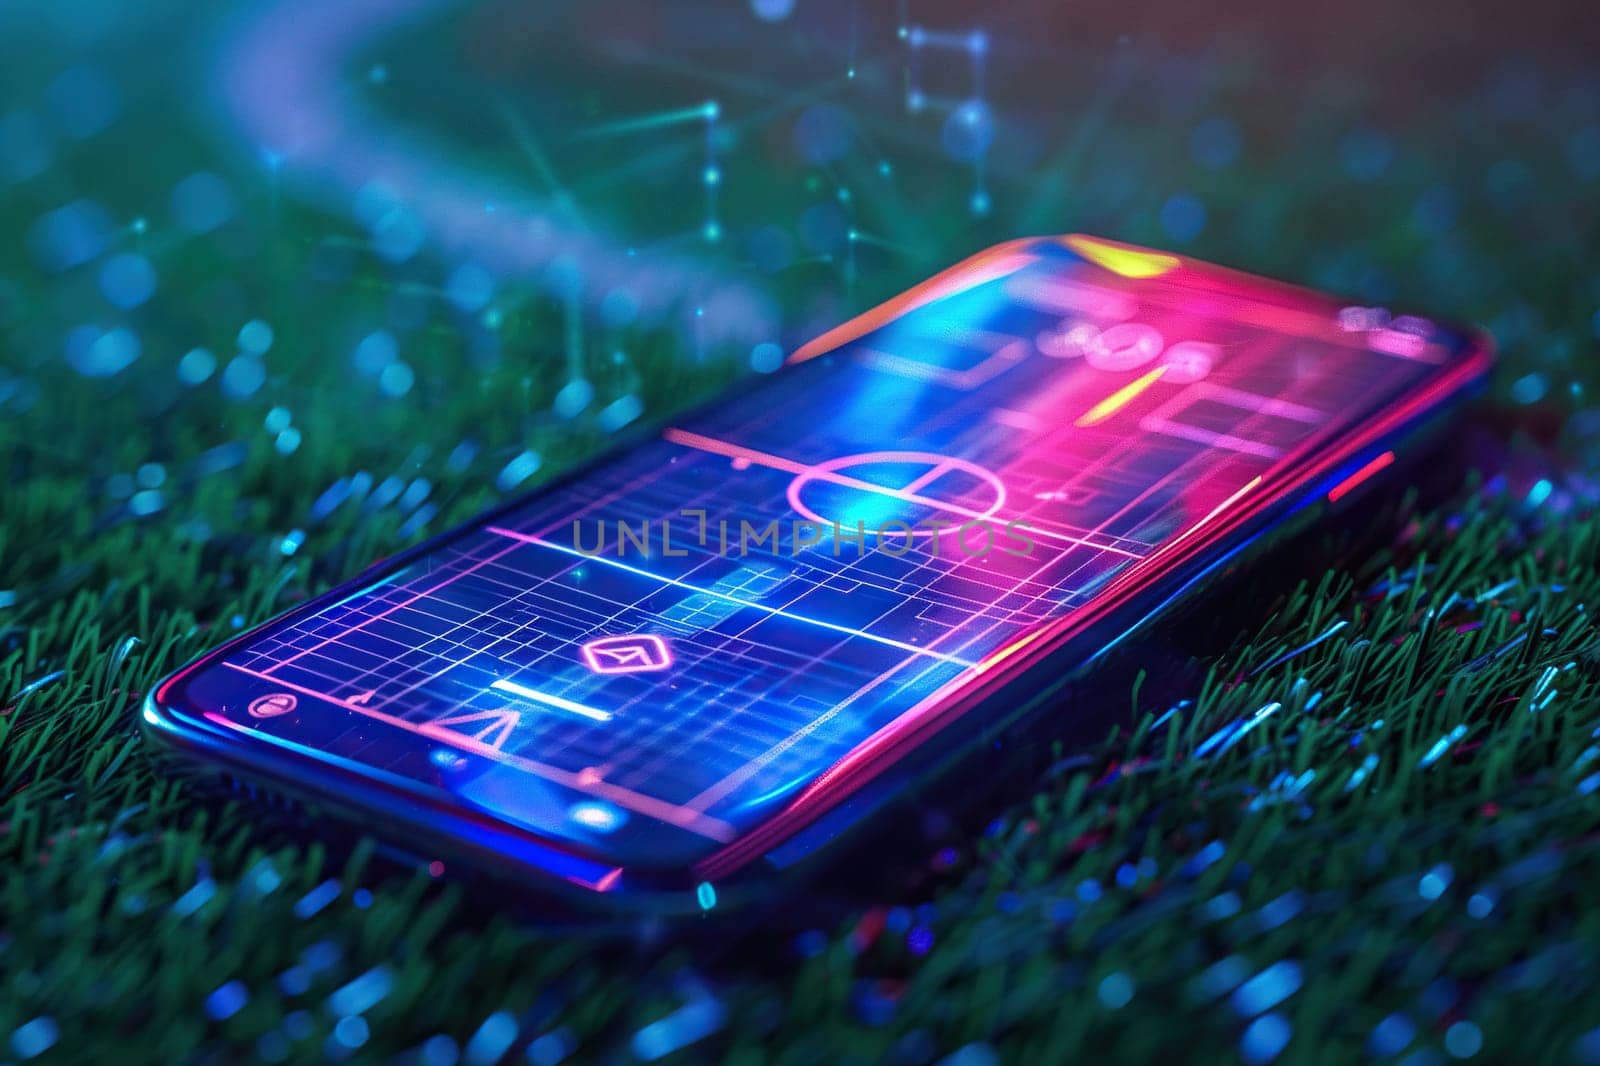 A modern smartphone with an open sports application on the screen lies on the grass in neon light.